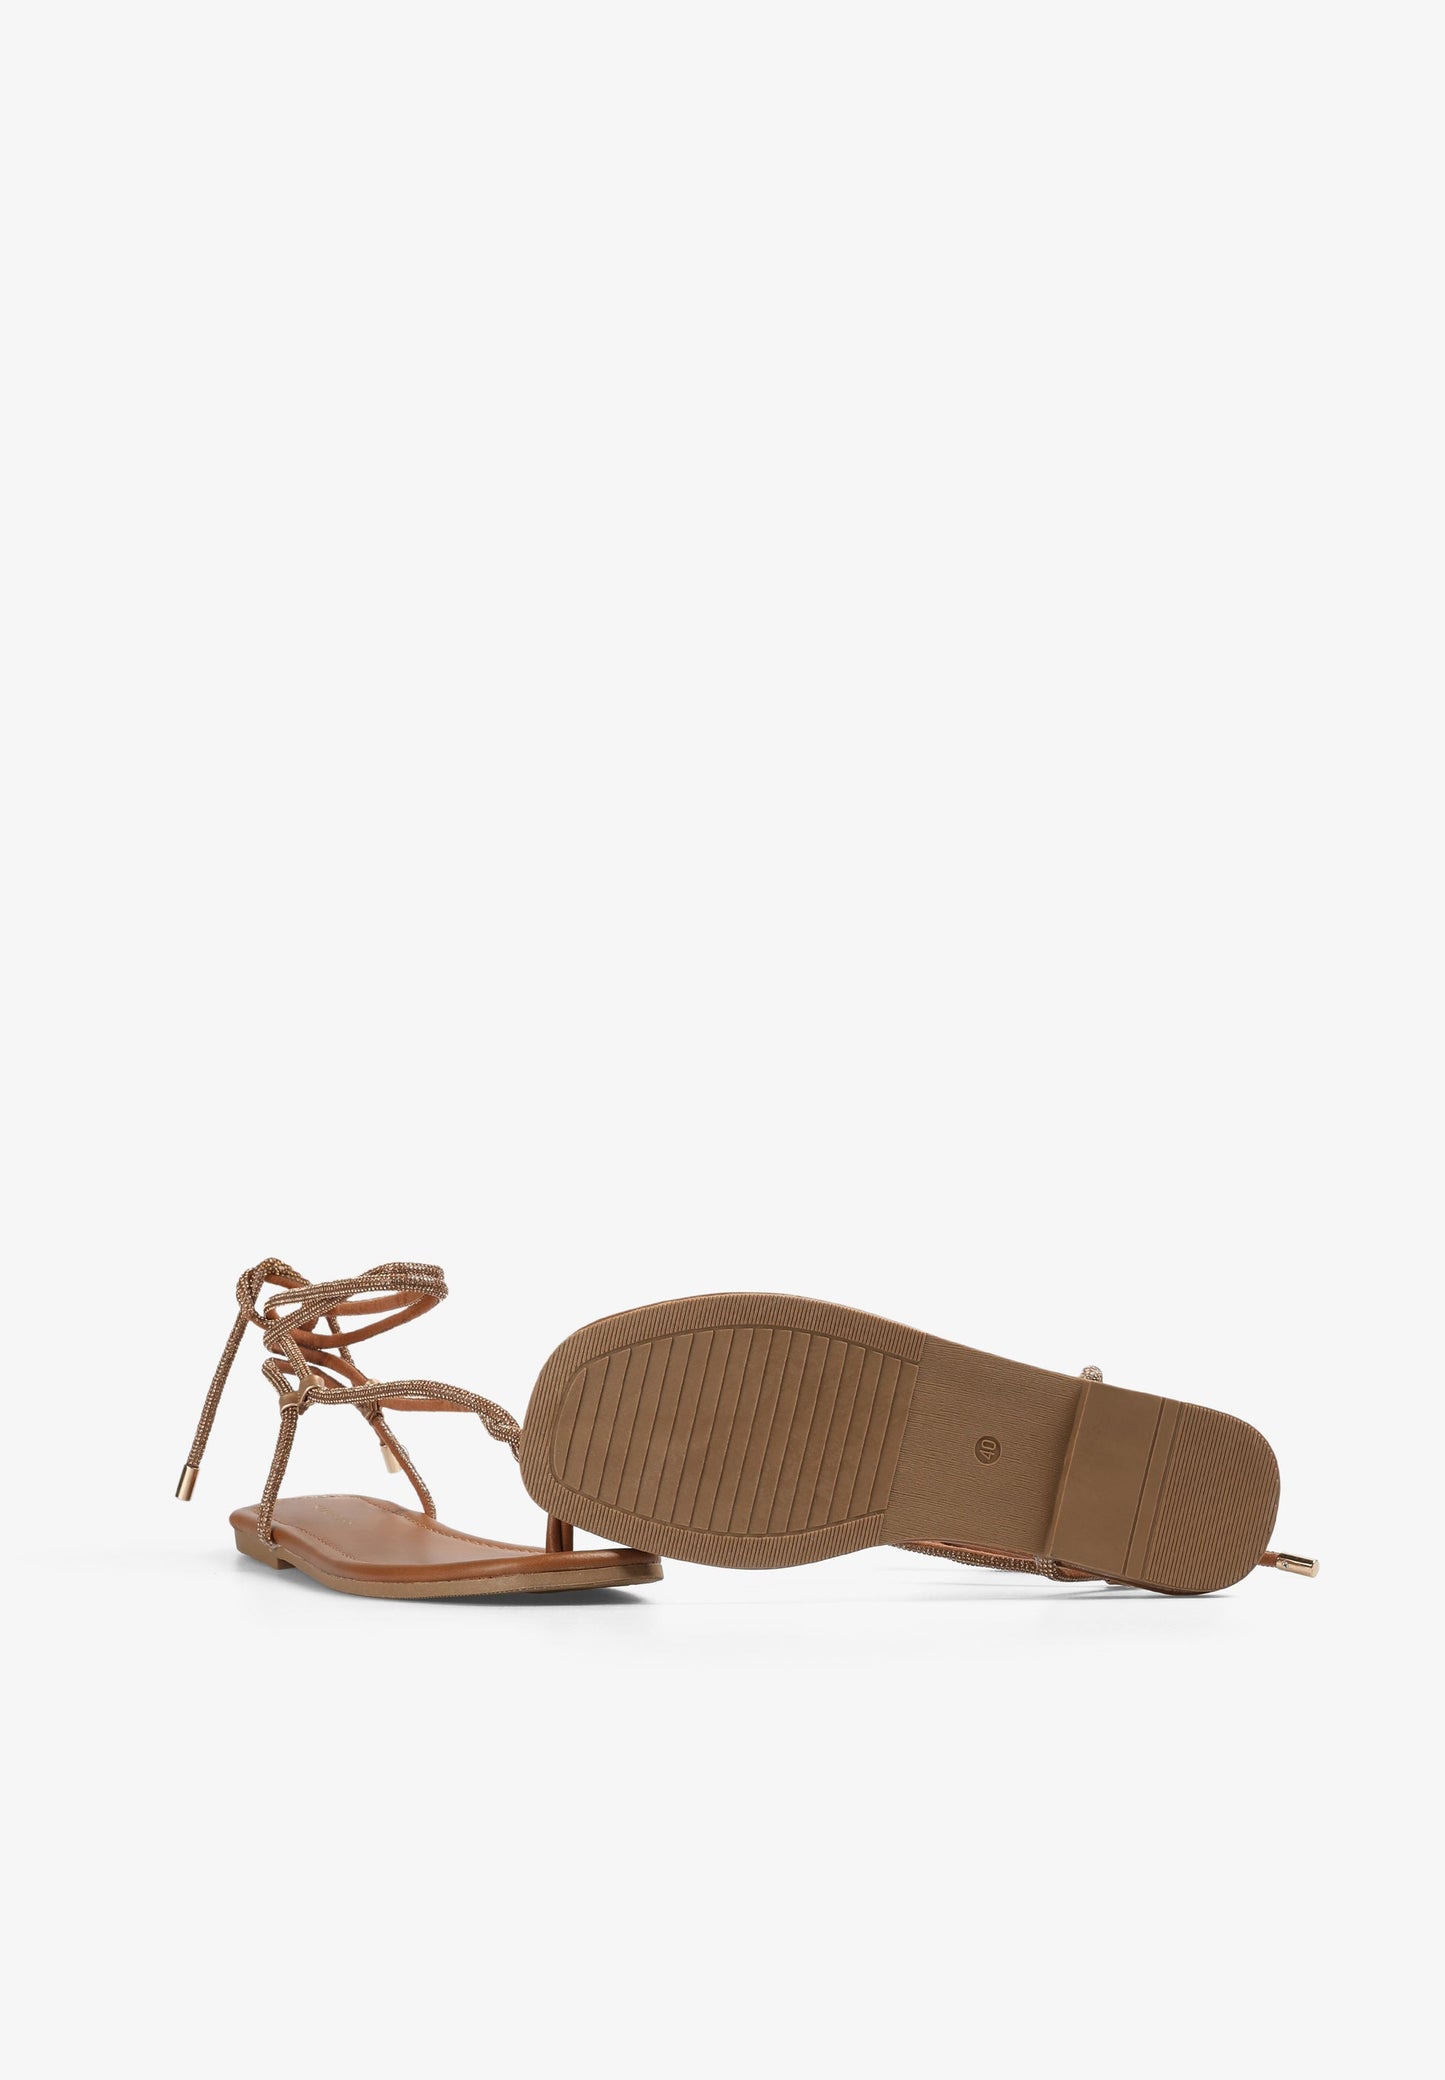 LEATHER SANDALS WITH STRAPS AND RHINESTONE DETAIL